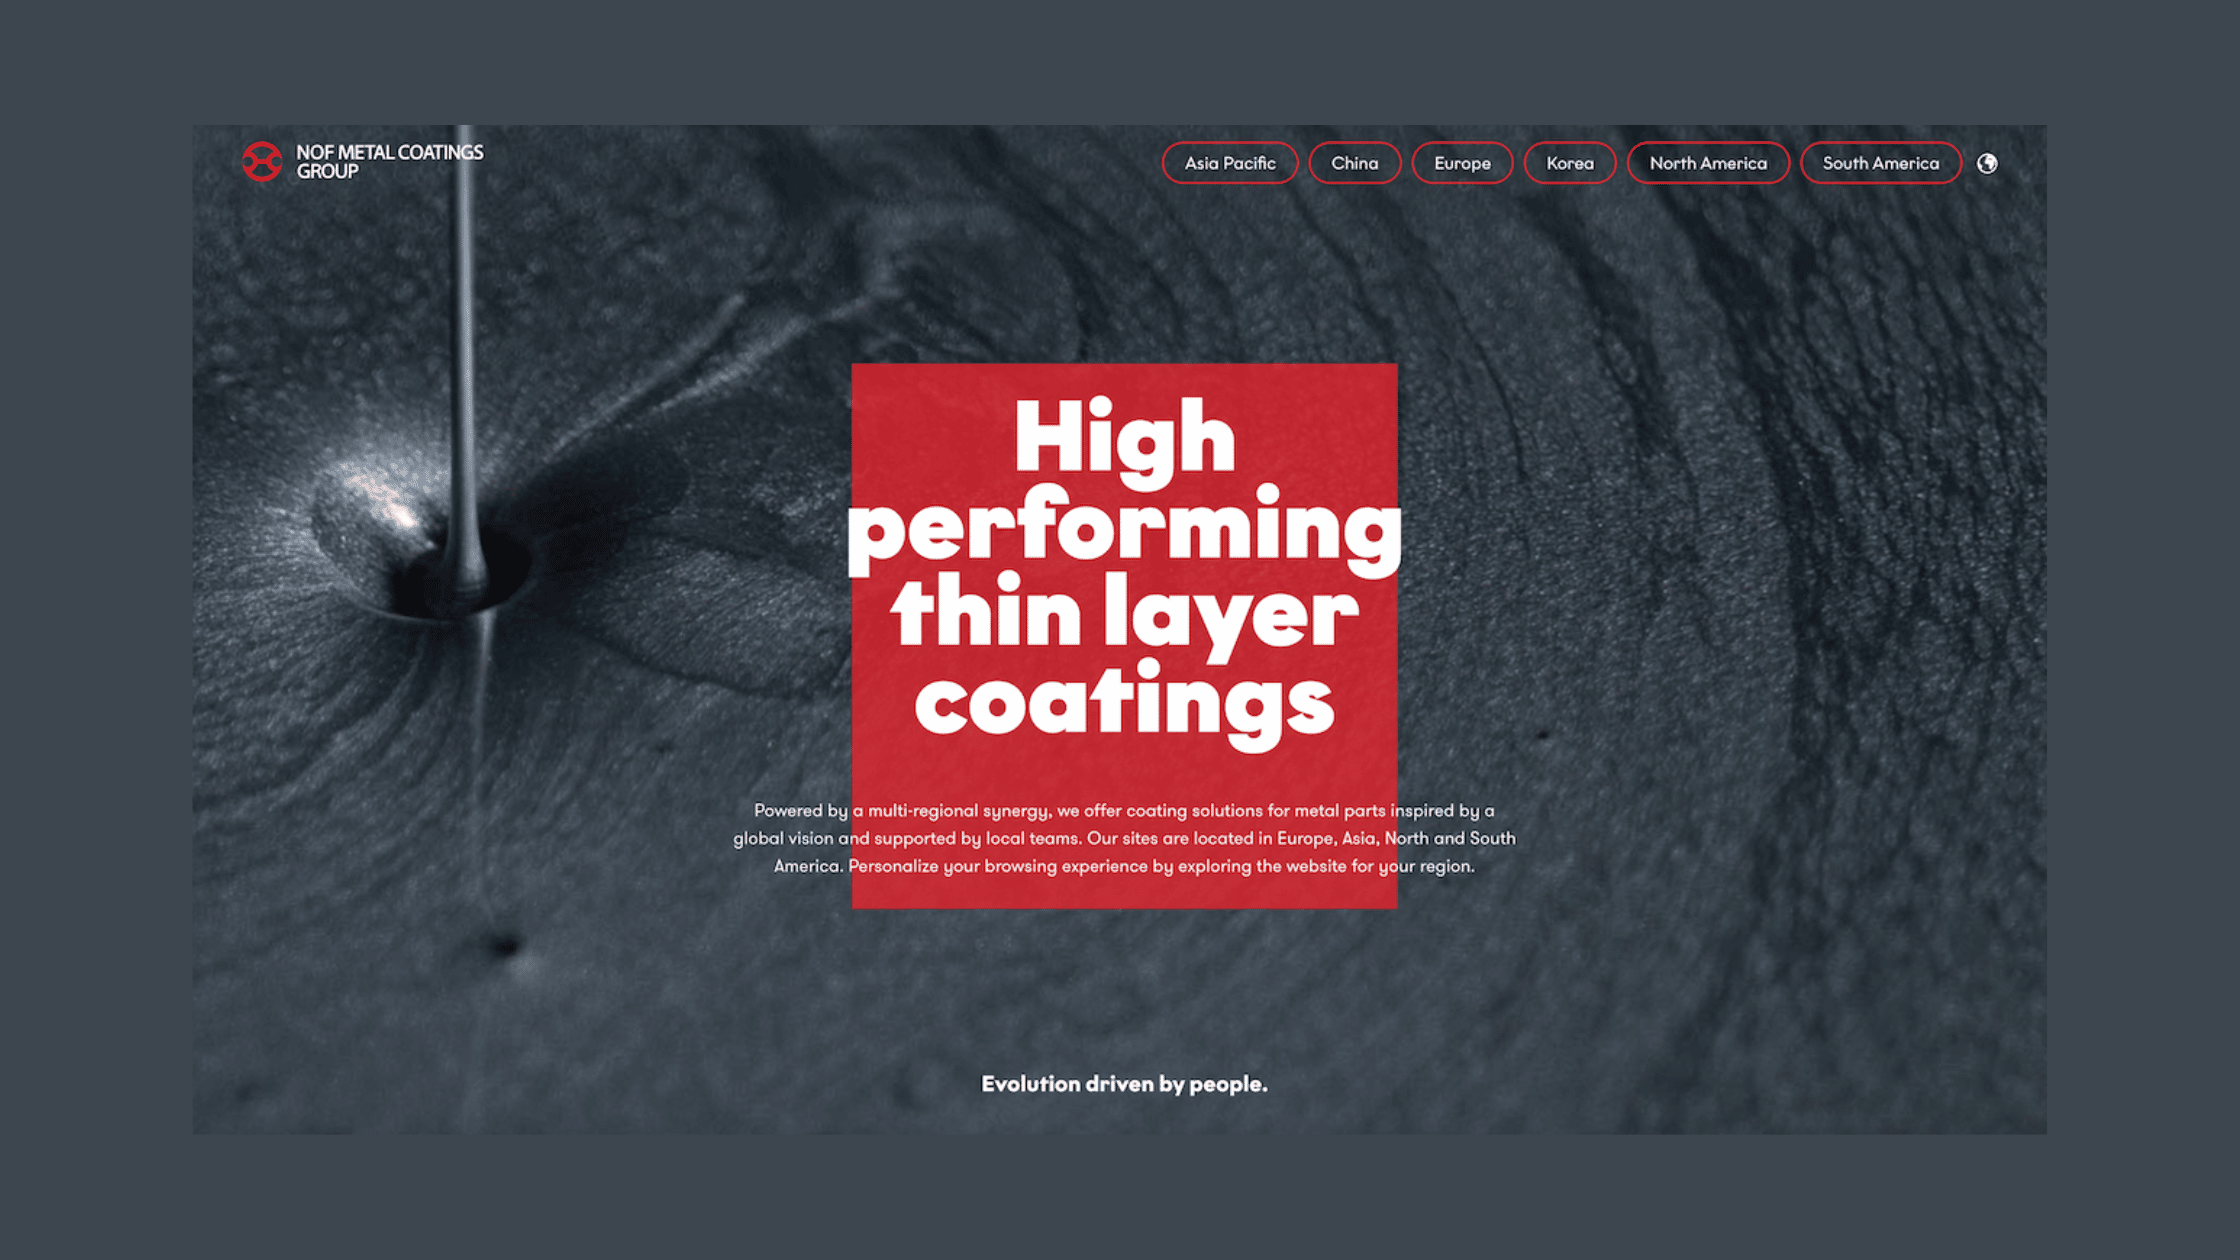 NOF Metal Coatings launched a new website